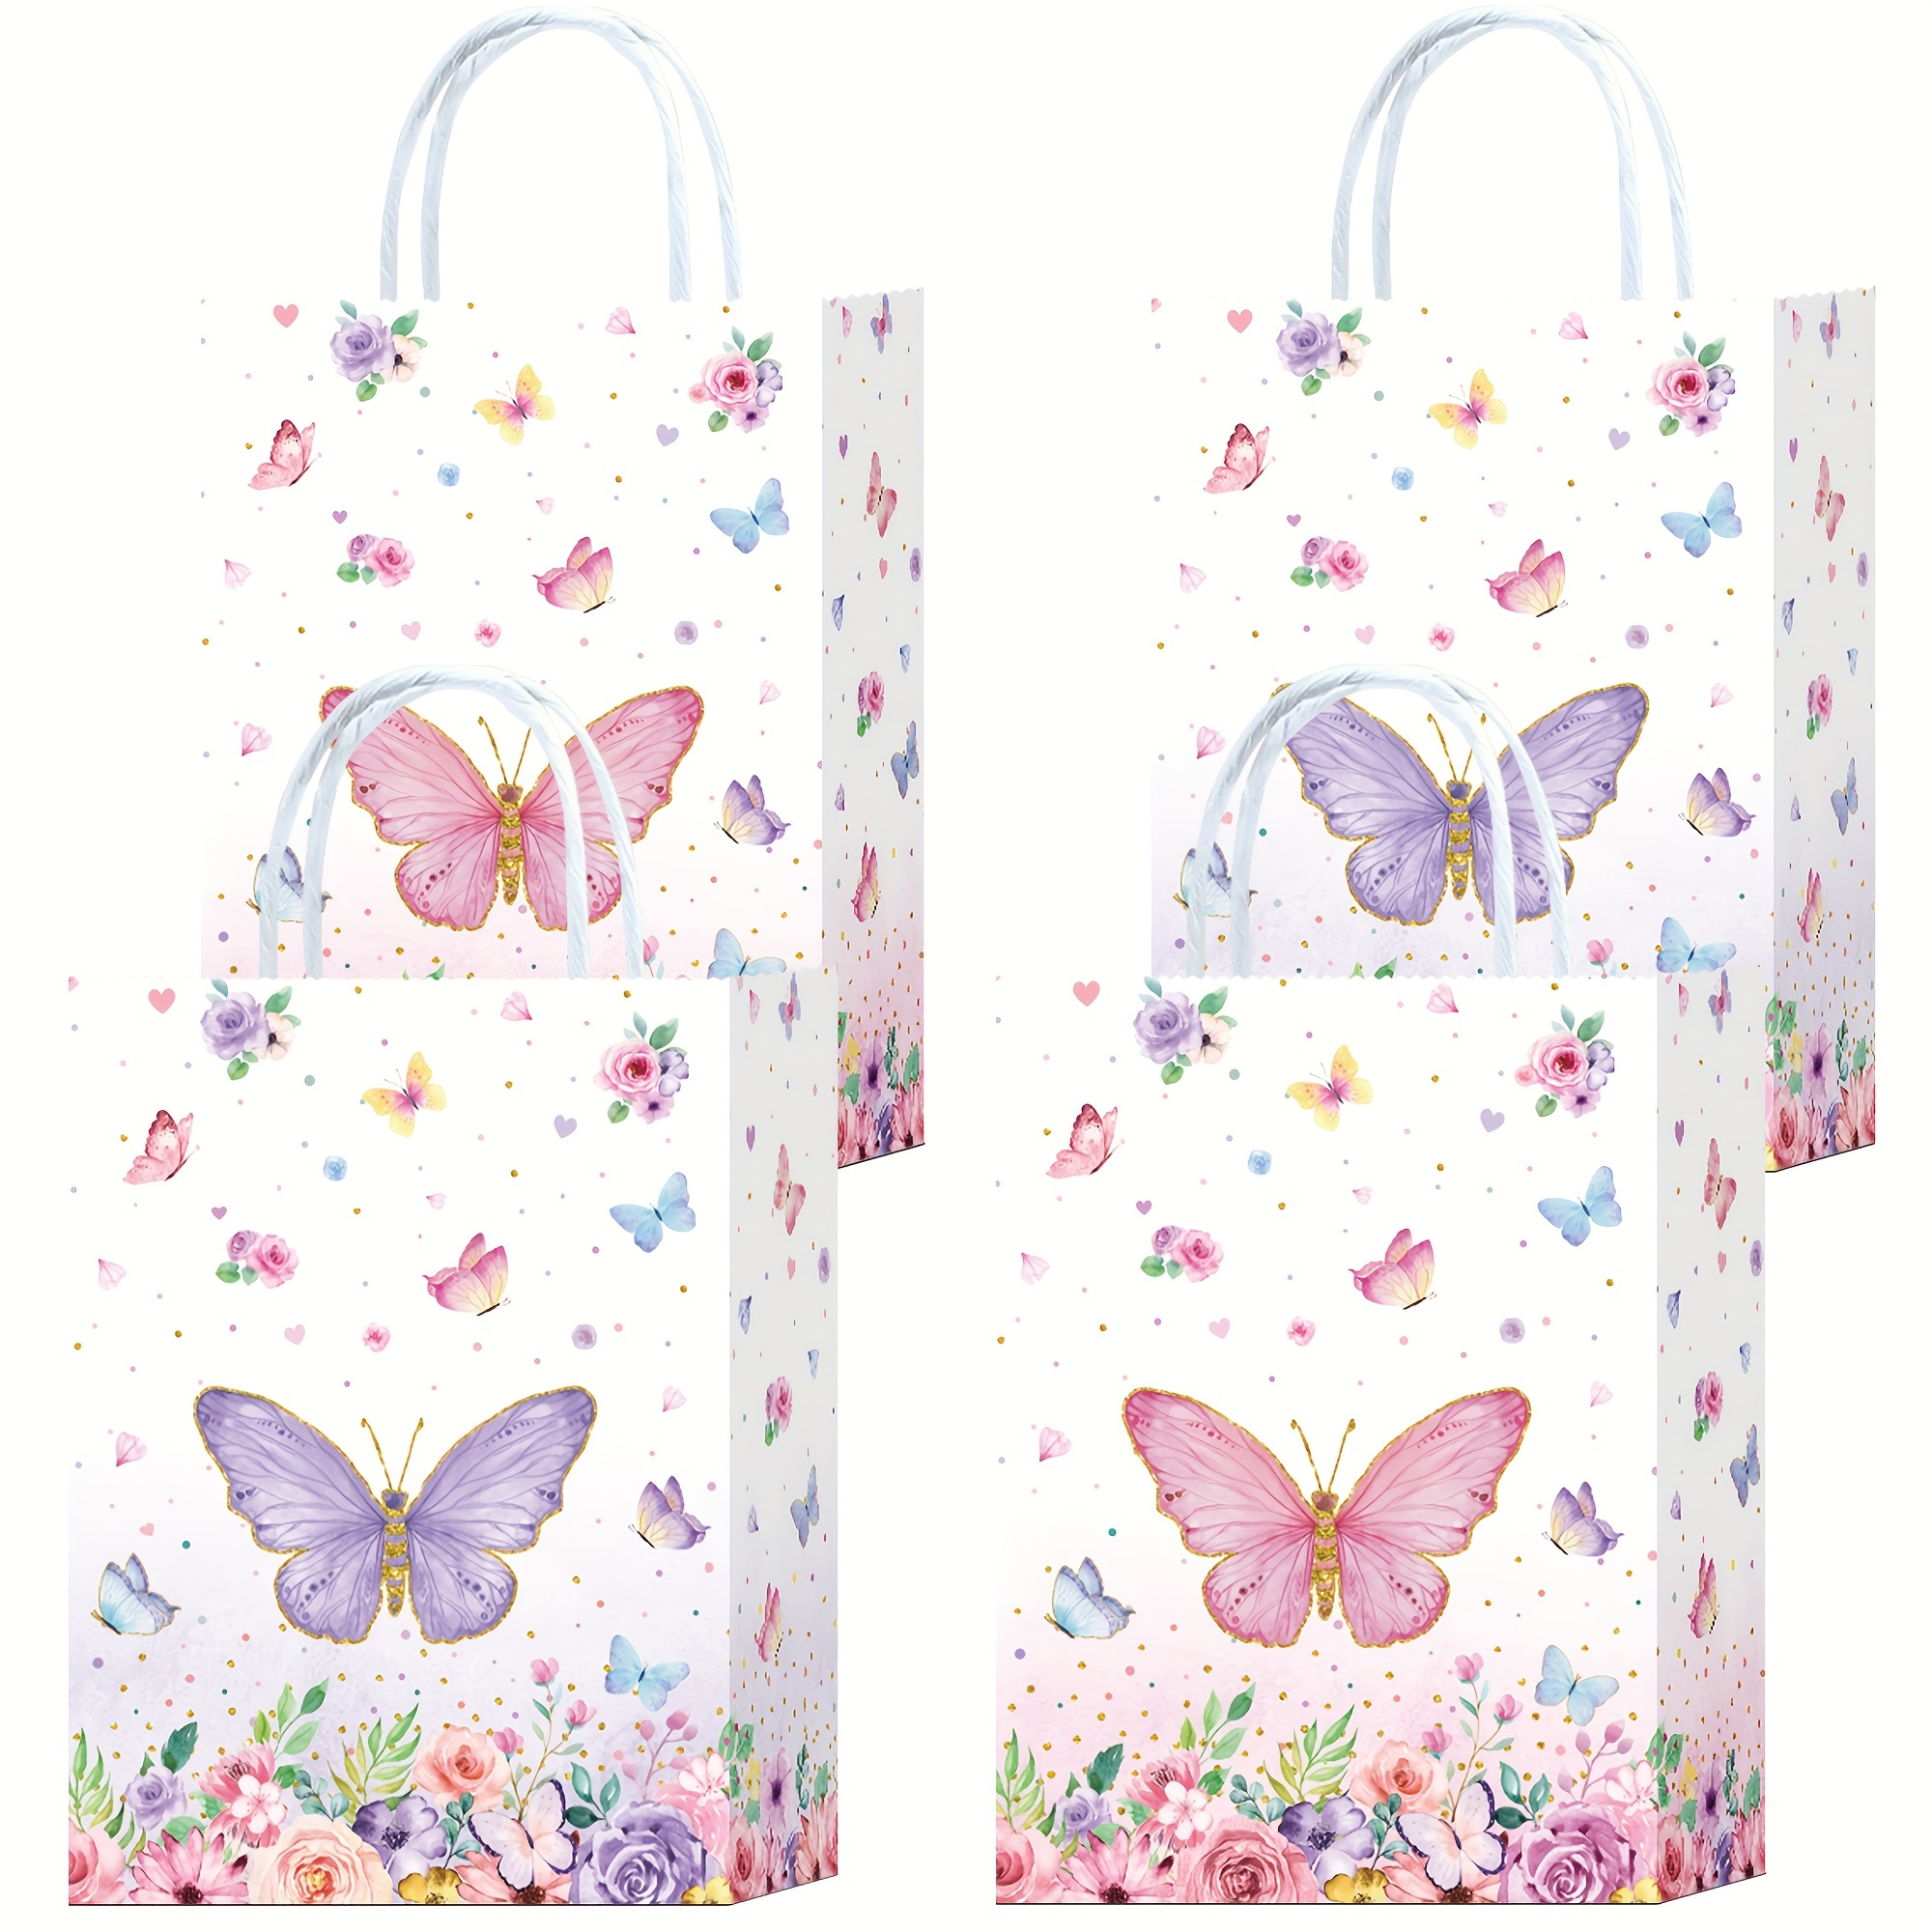 

16pcs, Butterfly Party Favors Gift Goodie Bags Pink Purple Flowers Treat Candy Small Floral Paper Bags With Handles For Birthday Par